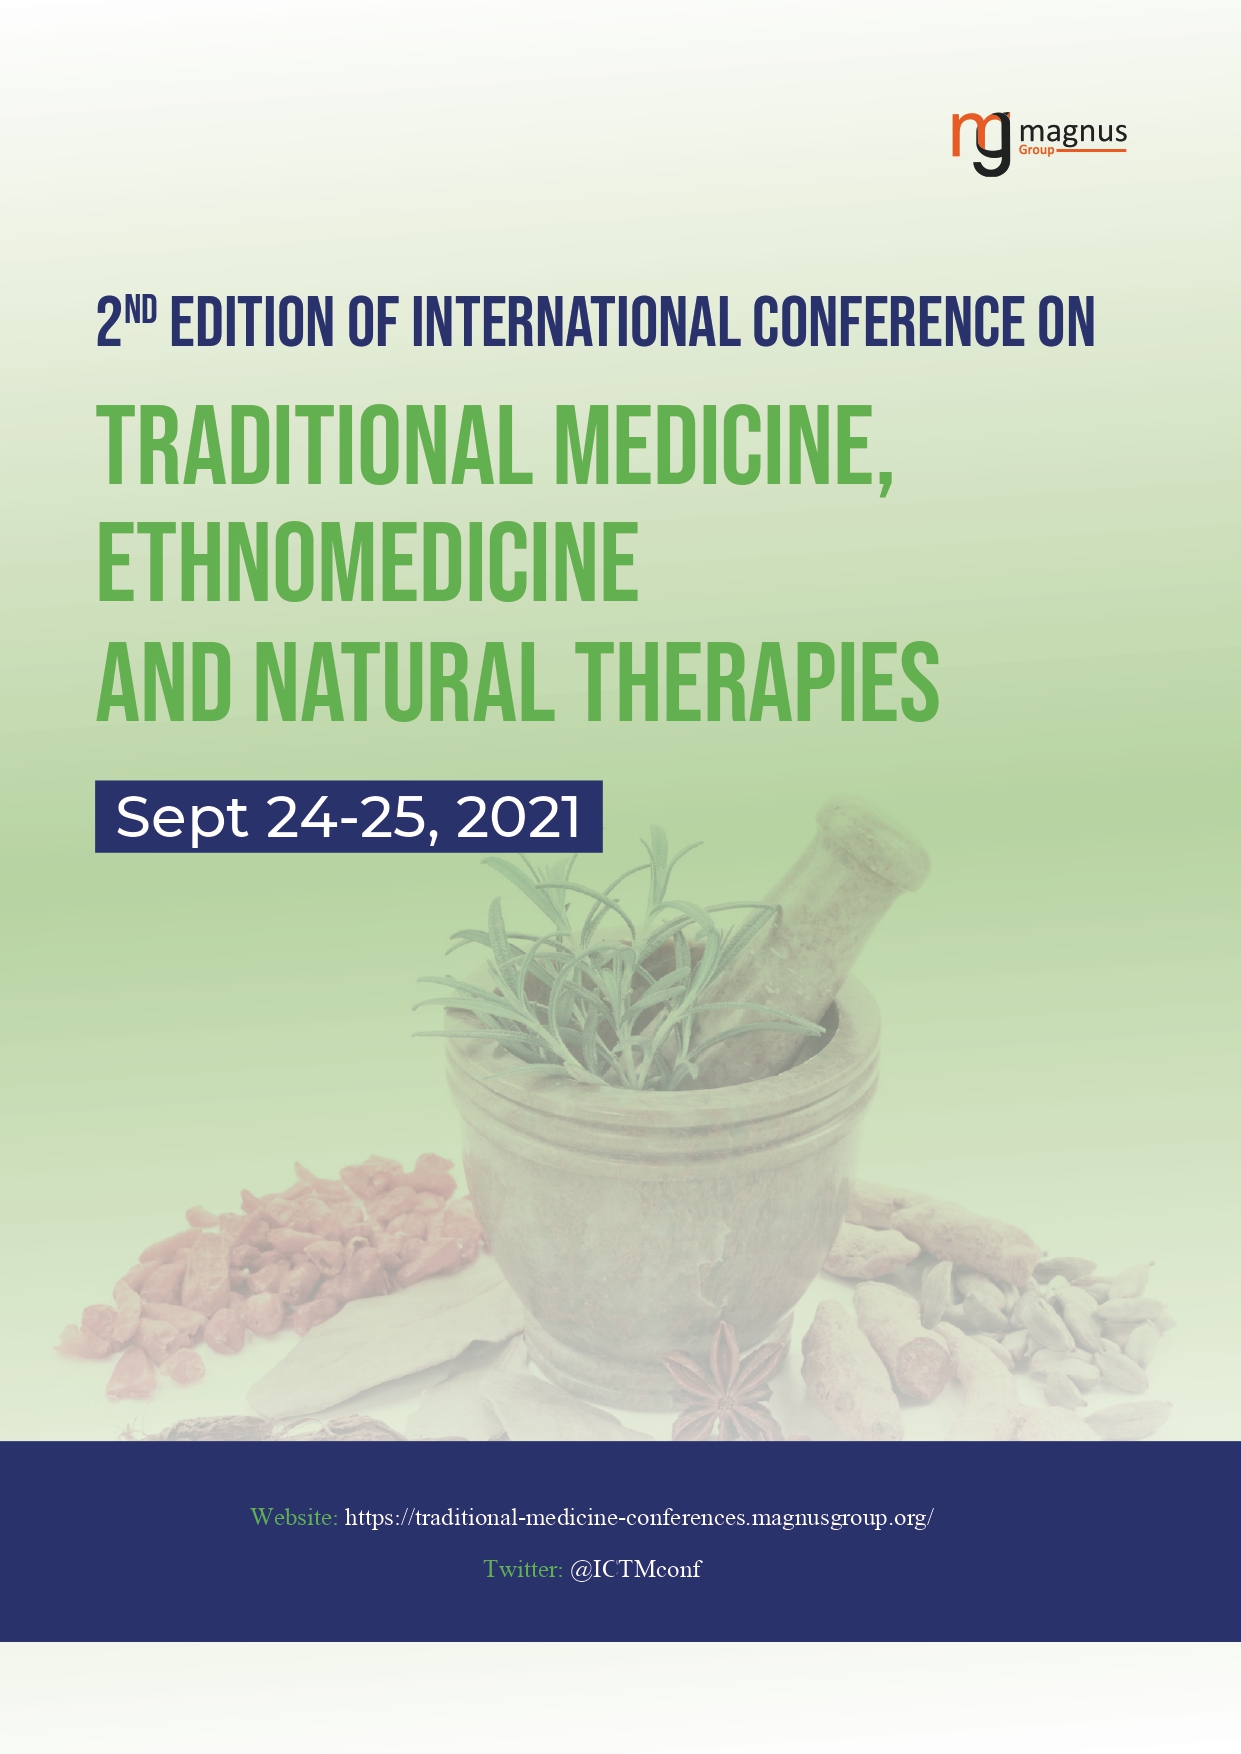 2nd Edition of International Conference on Traditional Medicine, Ethnomedicine and Natural Therapies Book